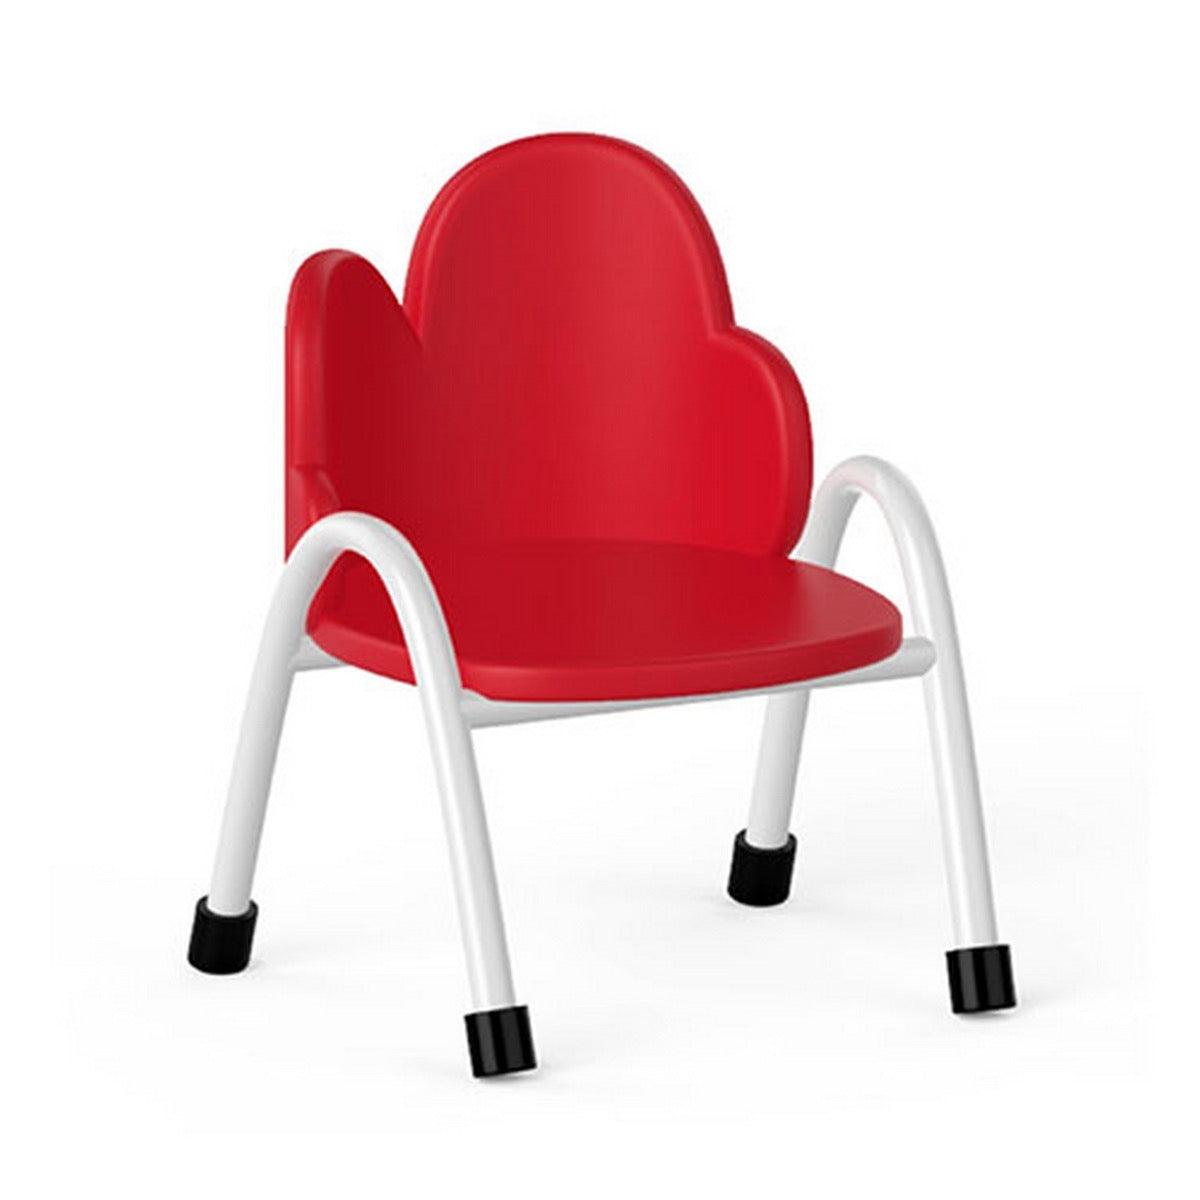 Ok Play Cloud Chair, Study Chair, Sturdy And Durable Chair, Plastic Chair, Perfect For Home, Creches And School, Red, 5 to 10 Years, Height 14 Inches